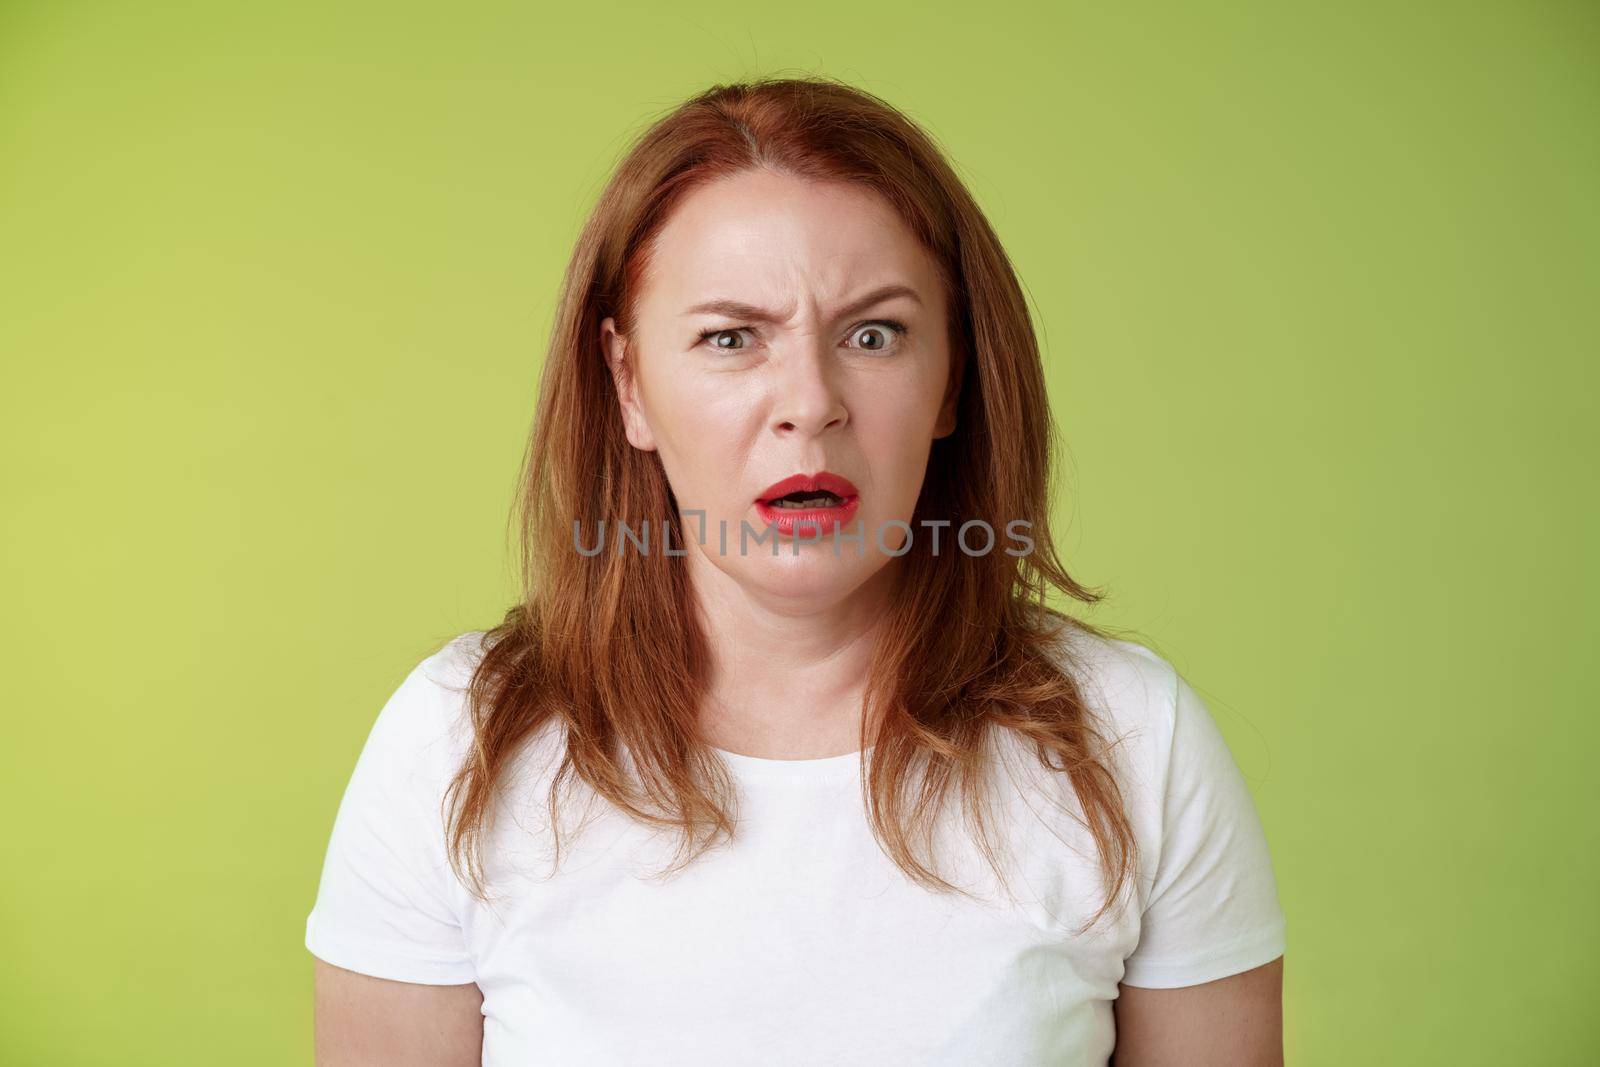 Confused shocked gasping middle-aged redhead woman cringe frustrated puzzled open mouth speechless freak out strange shocking scene stand green background perplexed disappointed. Copy space